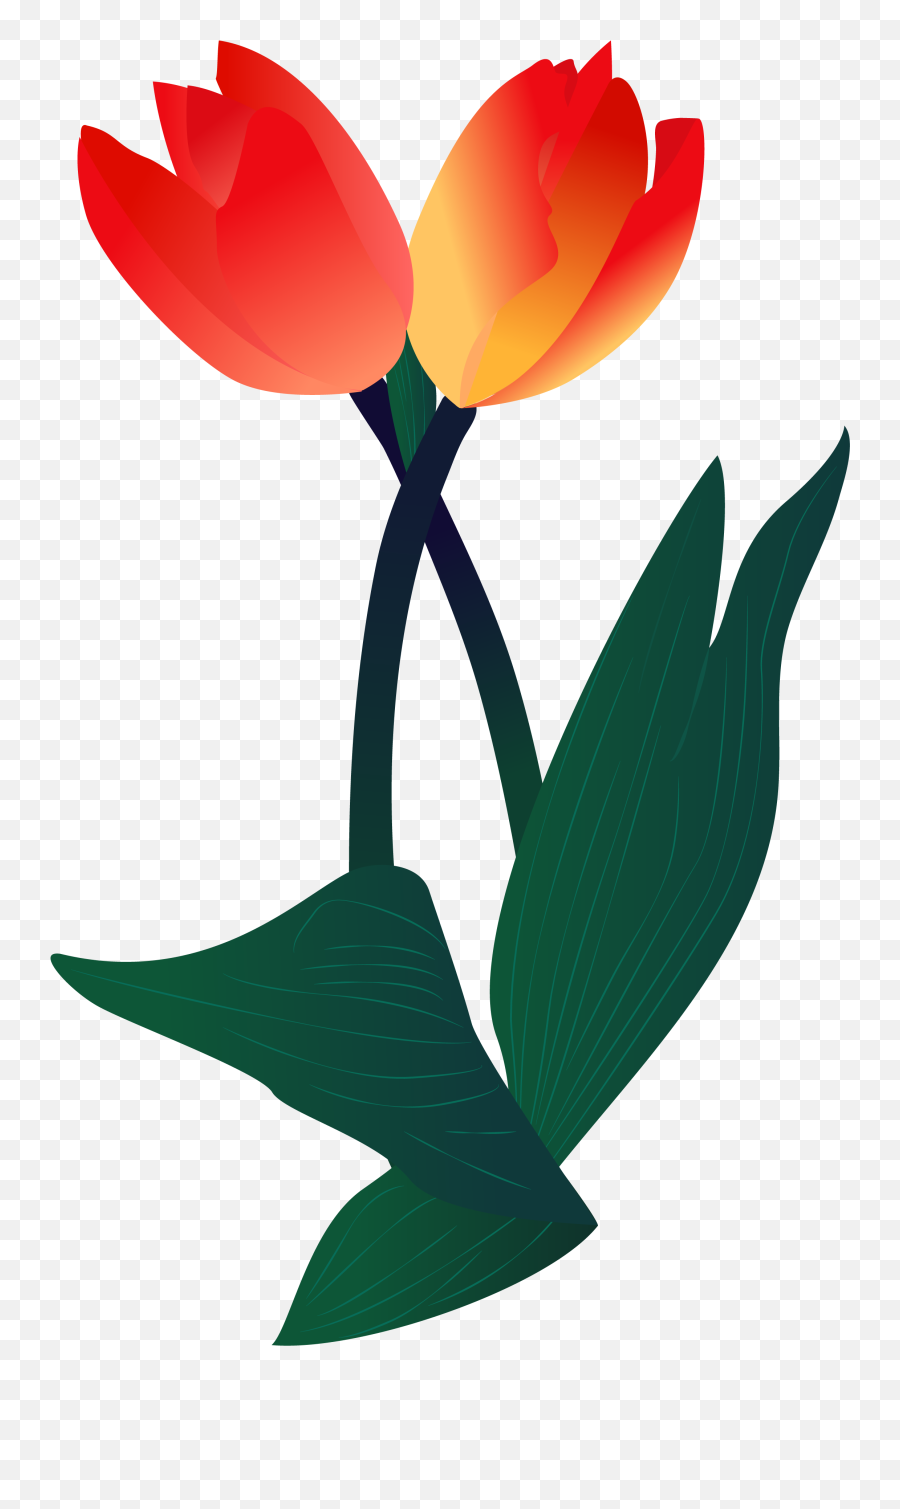 Plant Illustration Flower Png And Vector Image - Sprengeru0027s Hd Tulip Flower Png,Flower Illustration Png